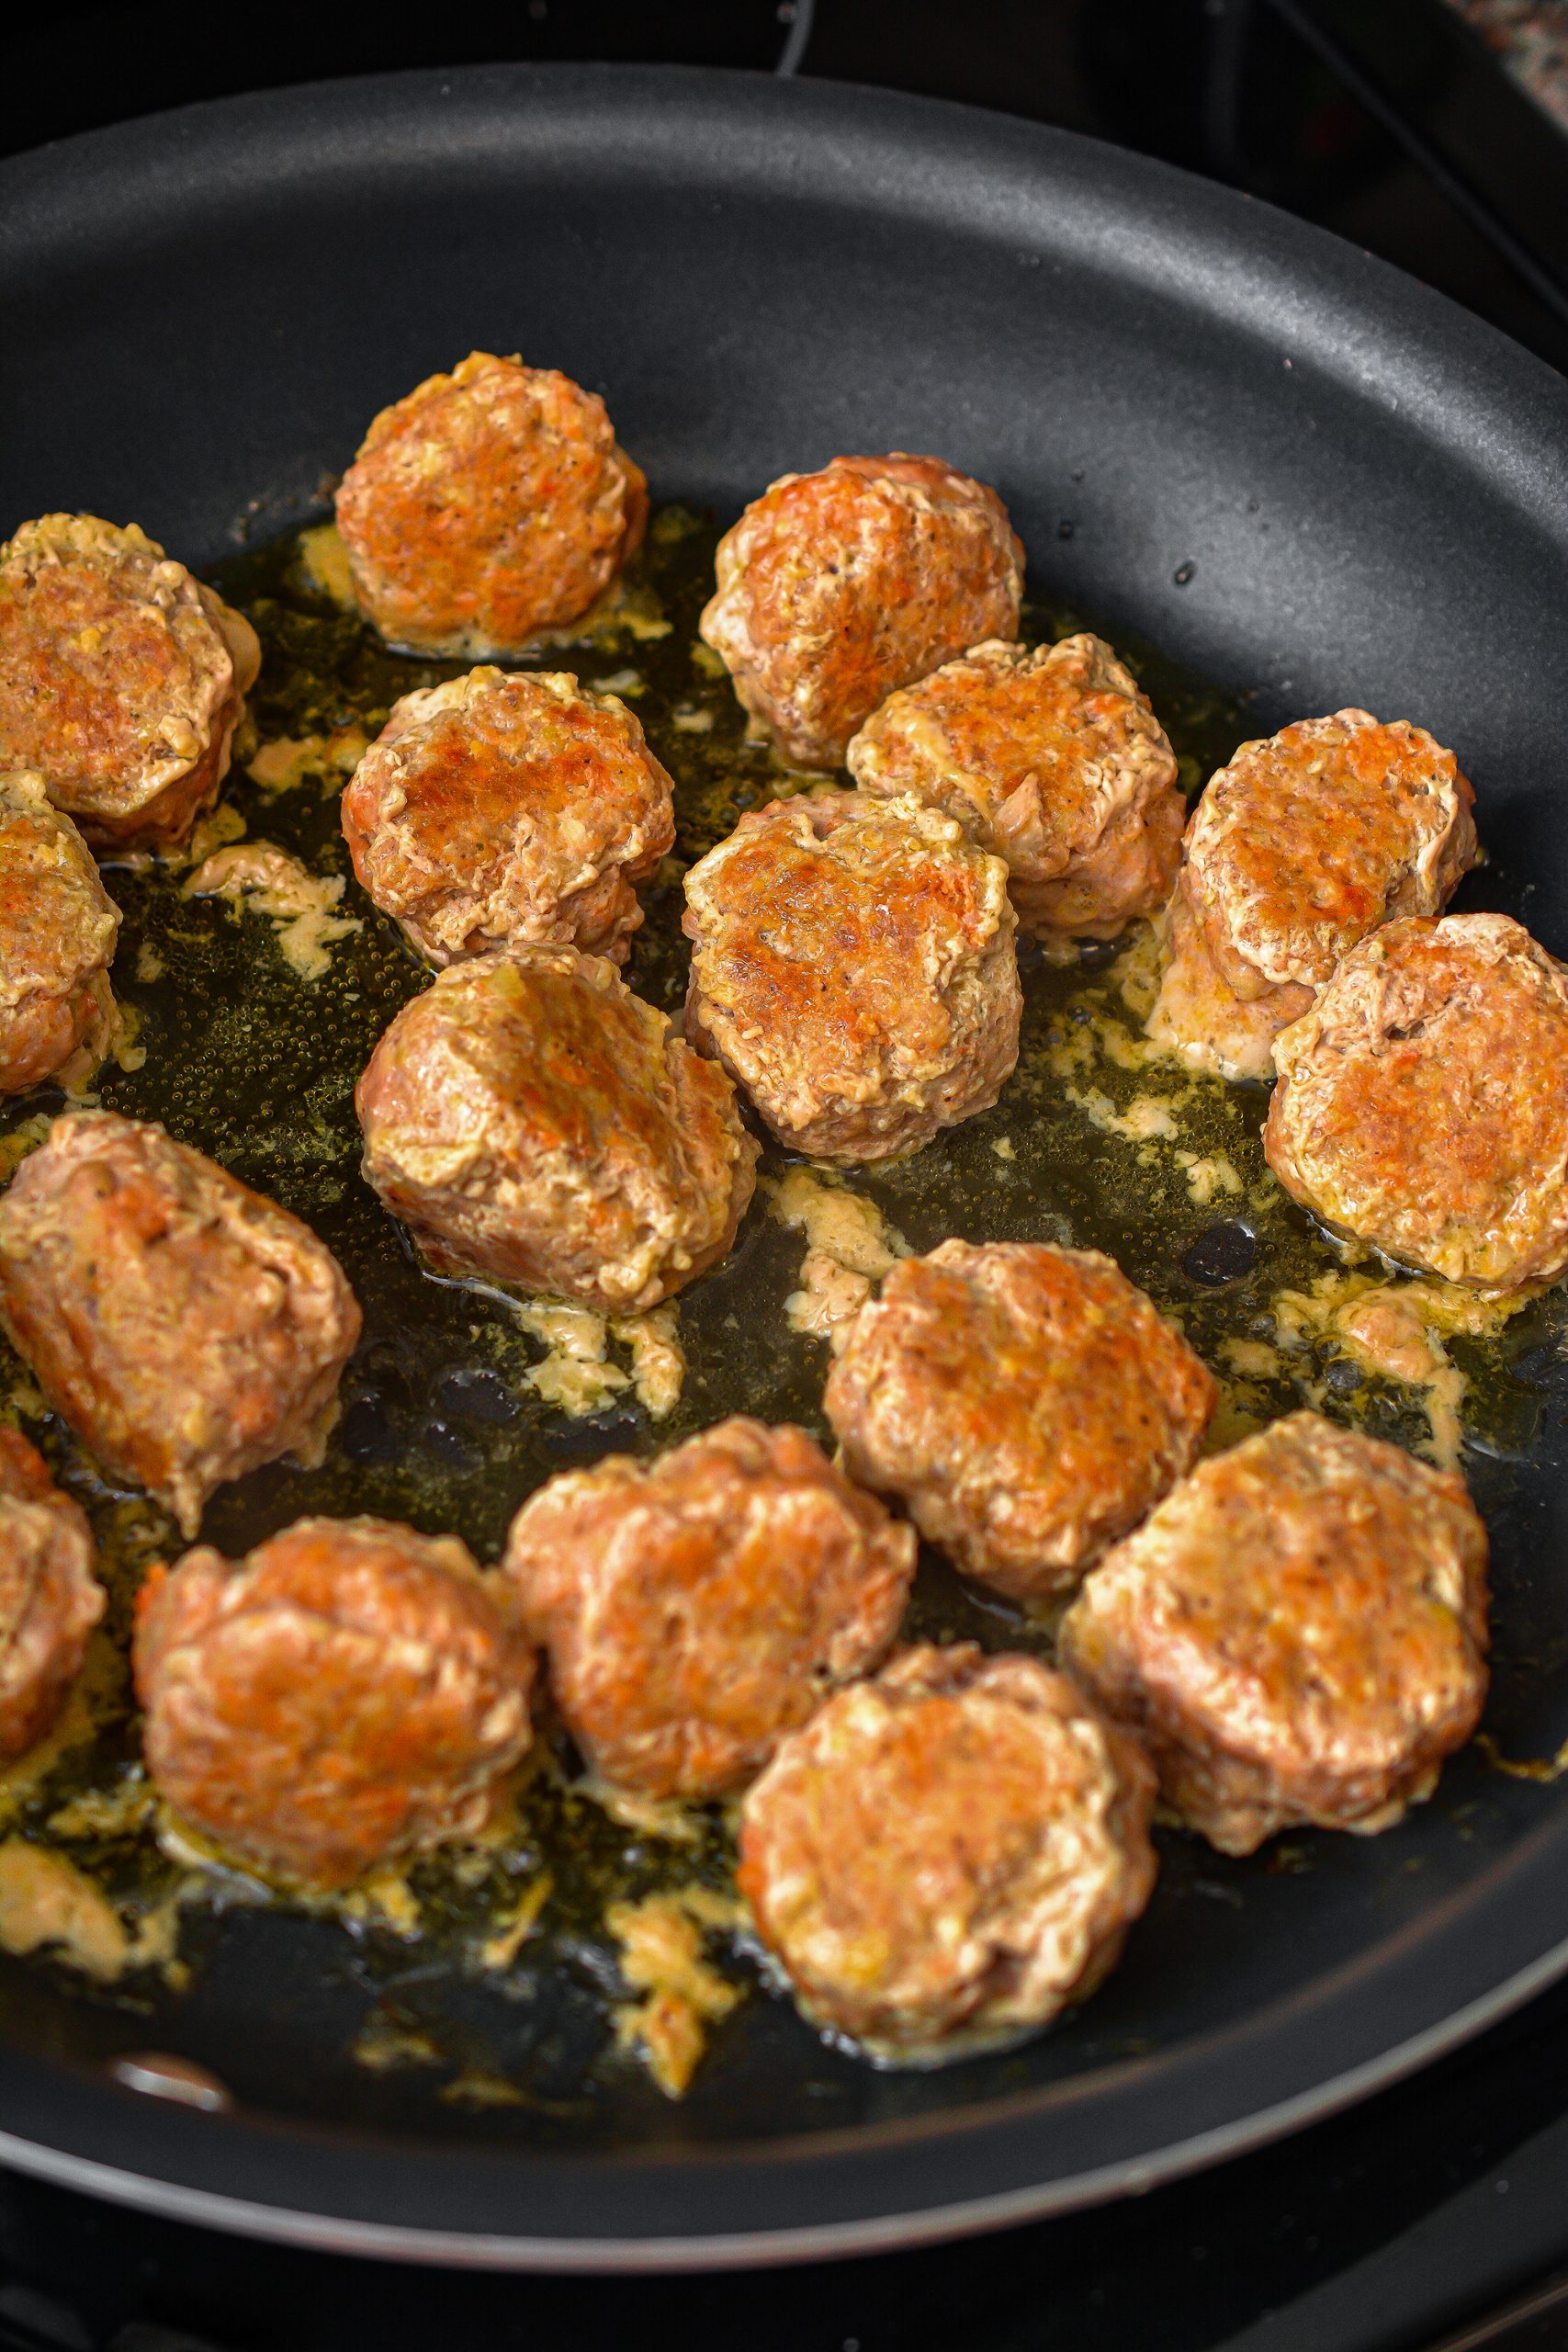 Mix together the ingredients for the meatballs, and mix with your hands until completely combined.